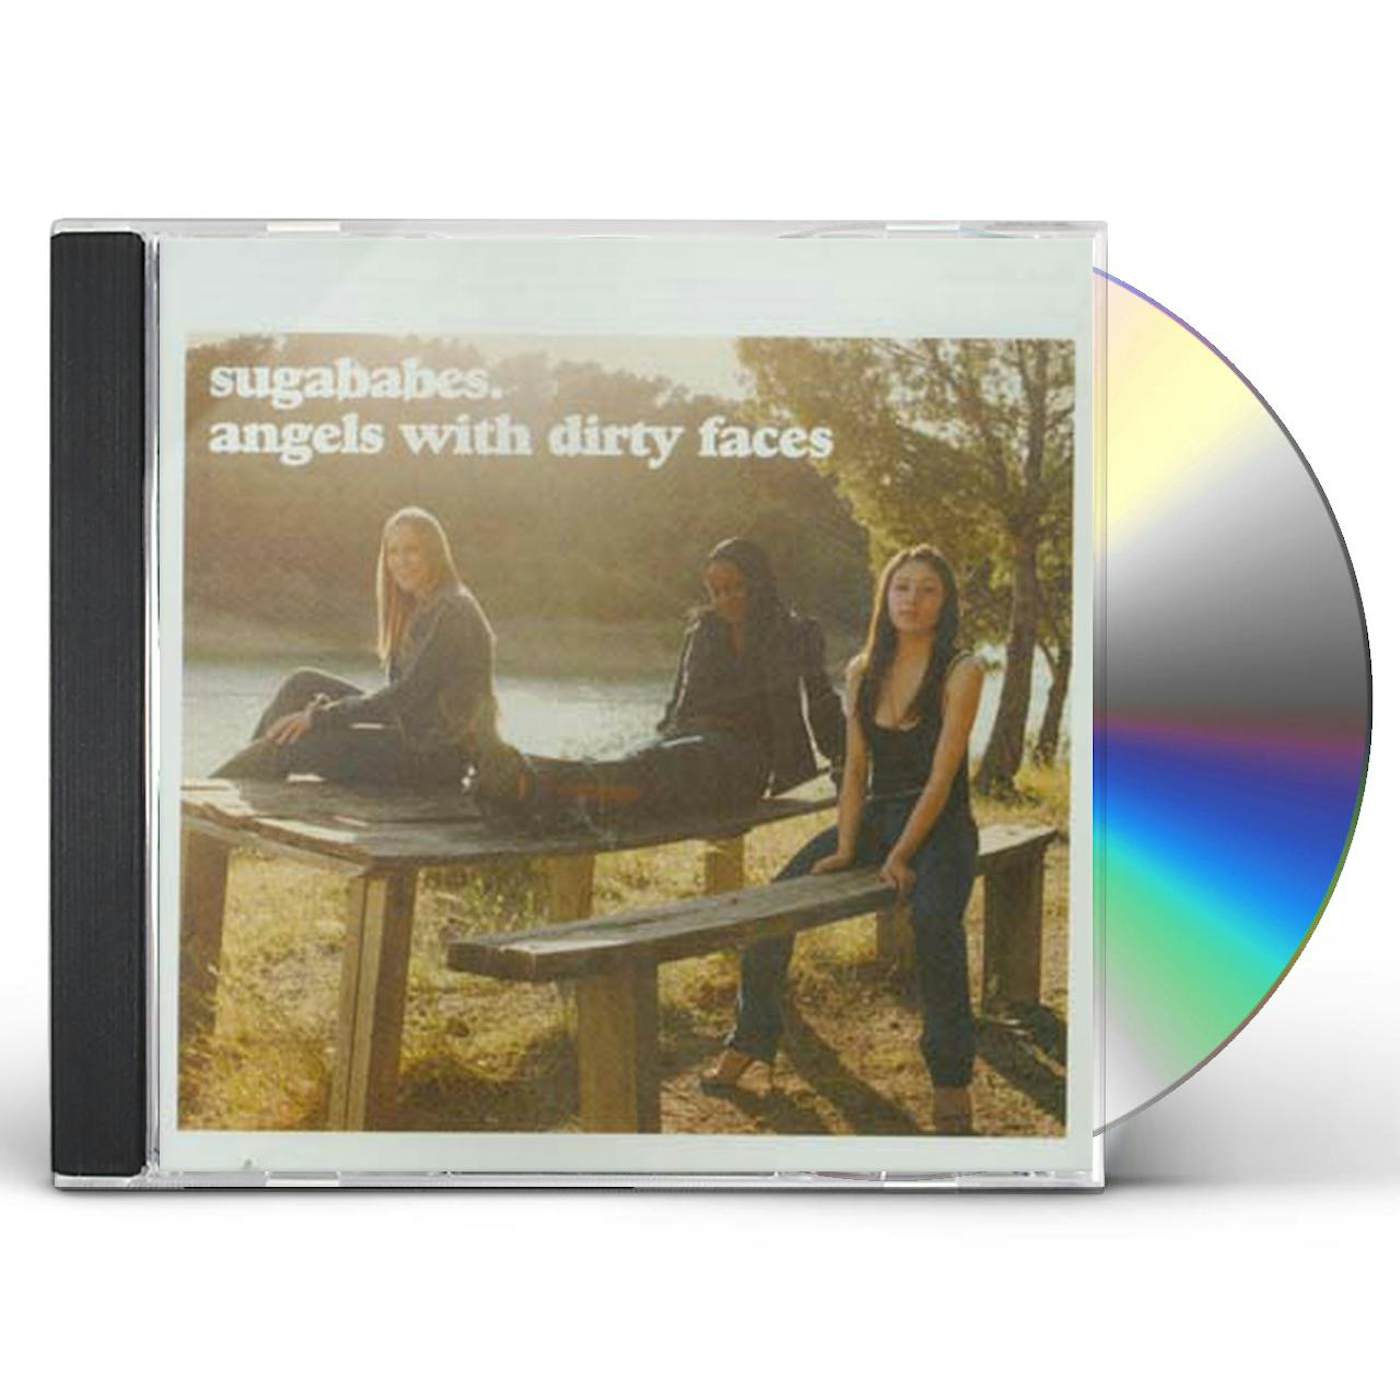 Sugababes ANGELS WITH DIRTY FACES CD